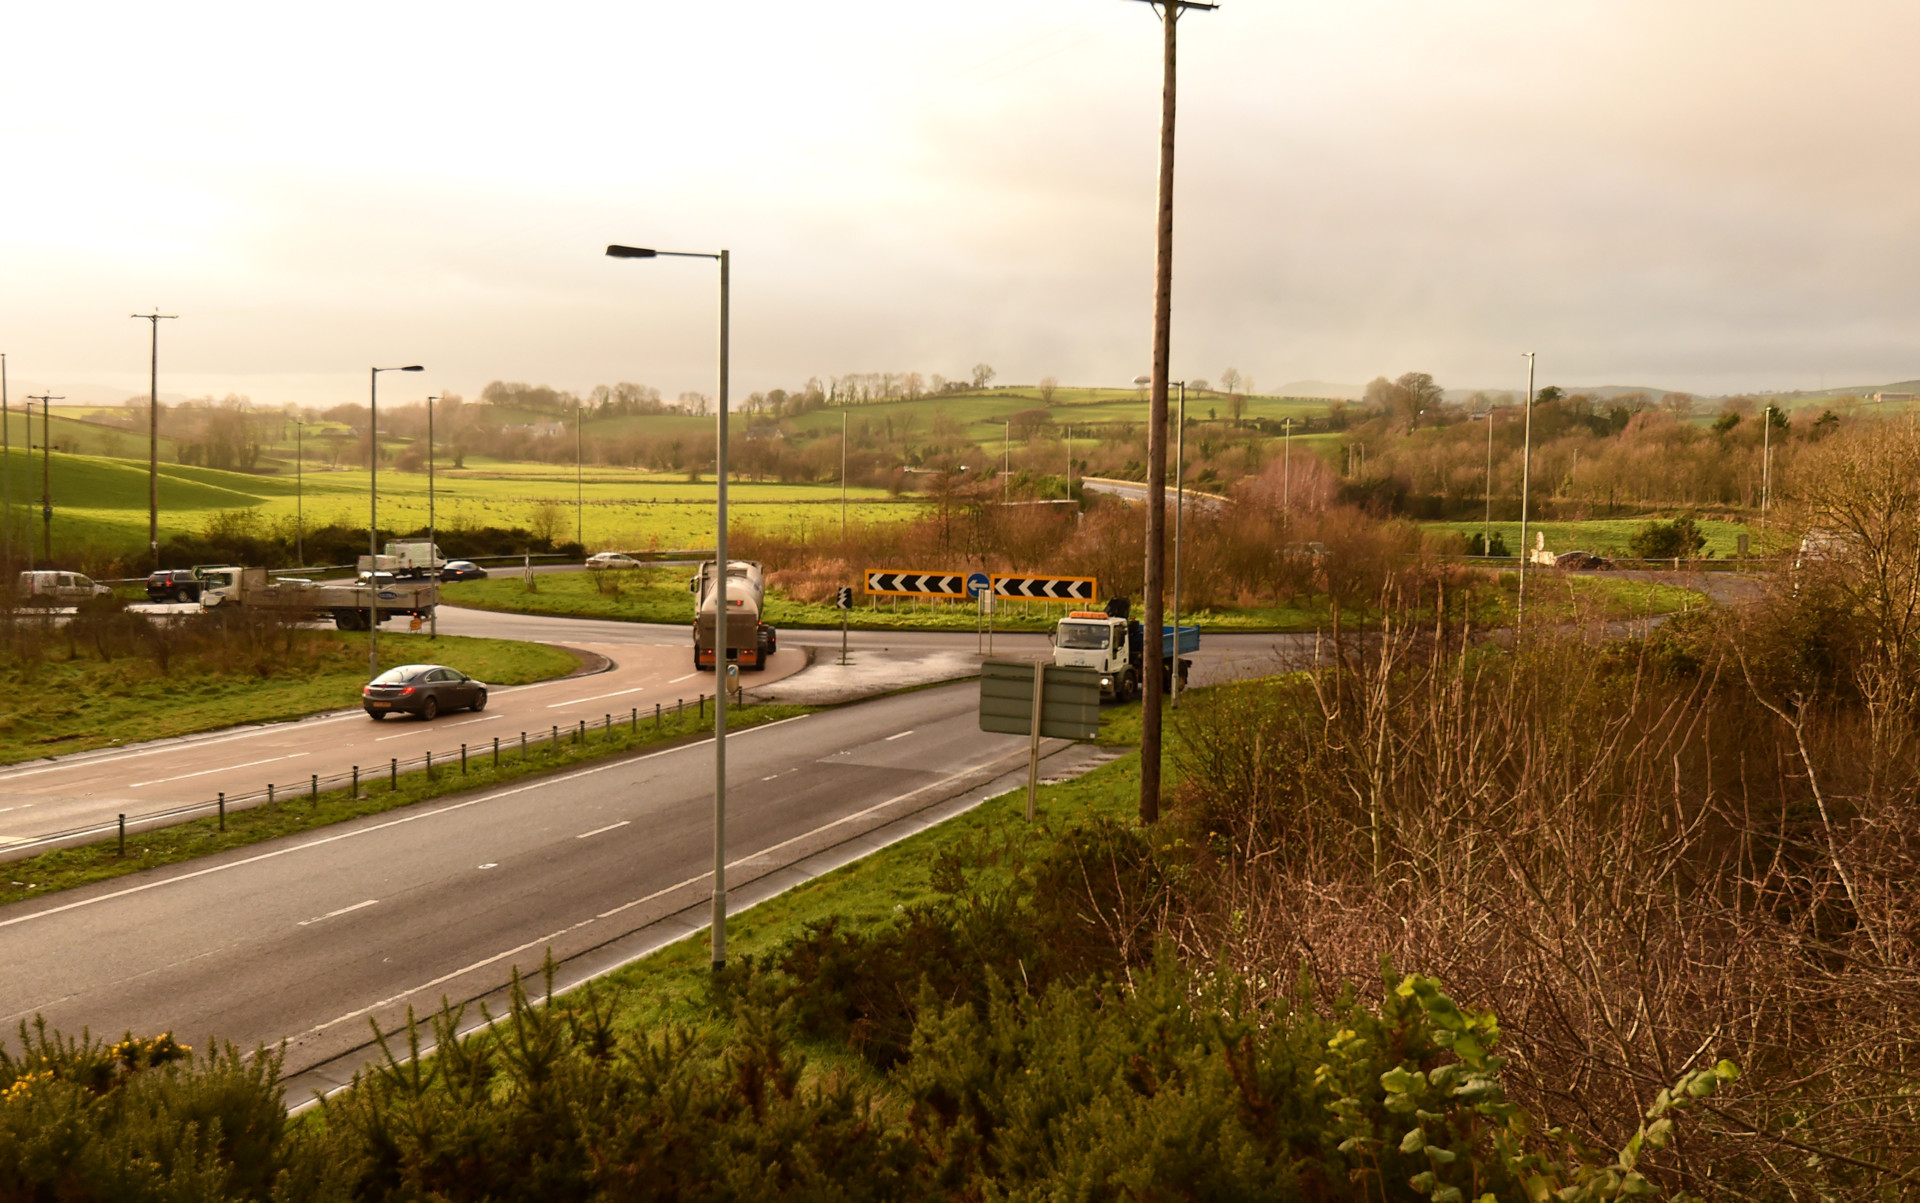 Drink-driver went wrong way on Ballygawley roundabout